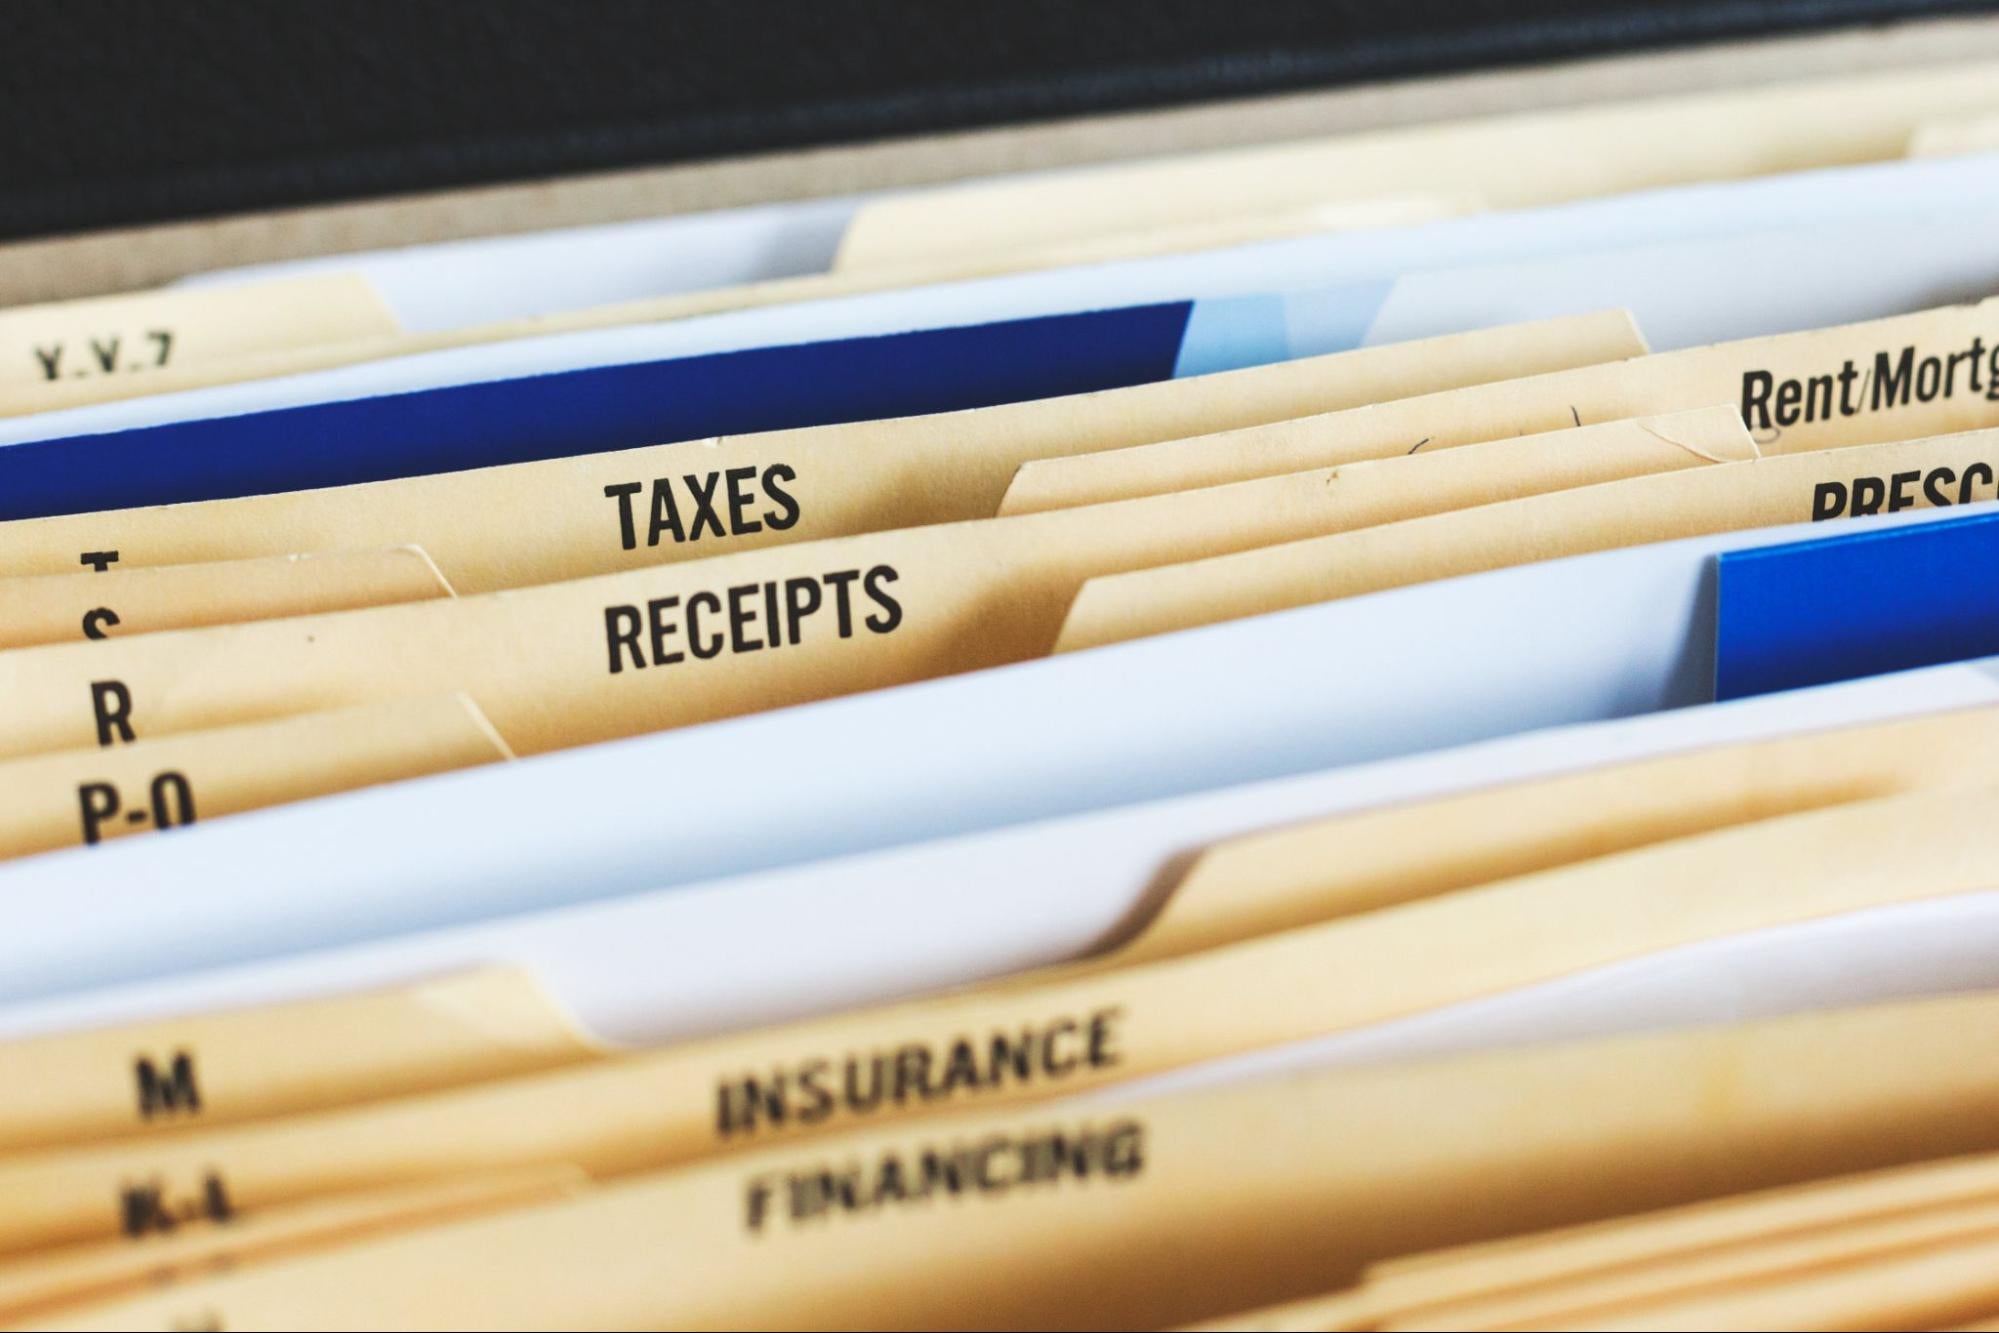 Tax files and receipts: small retail business tax tips